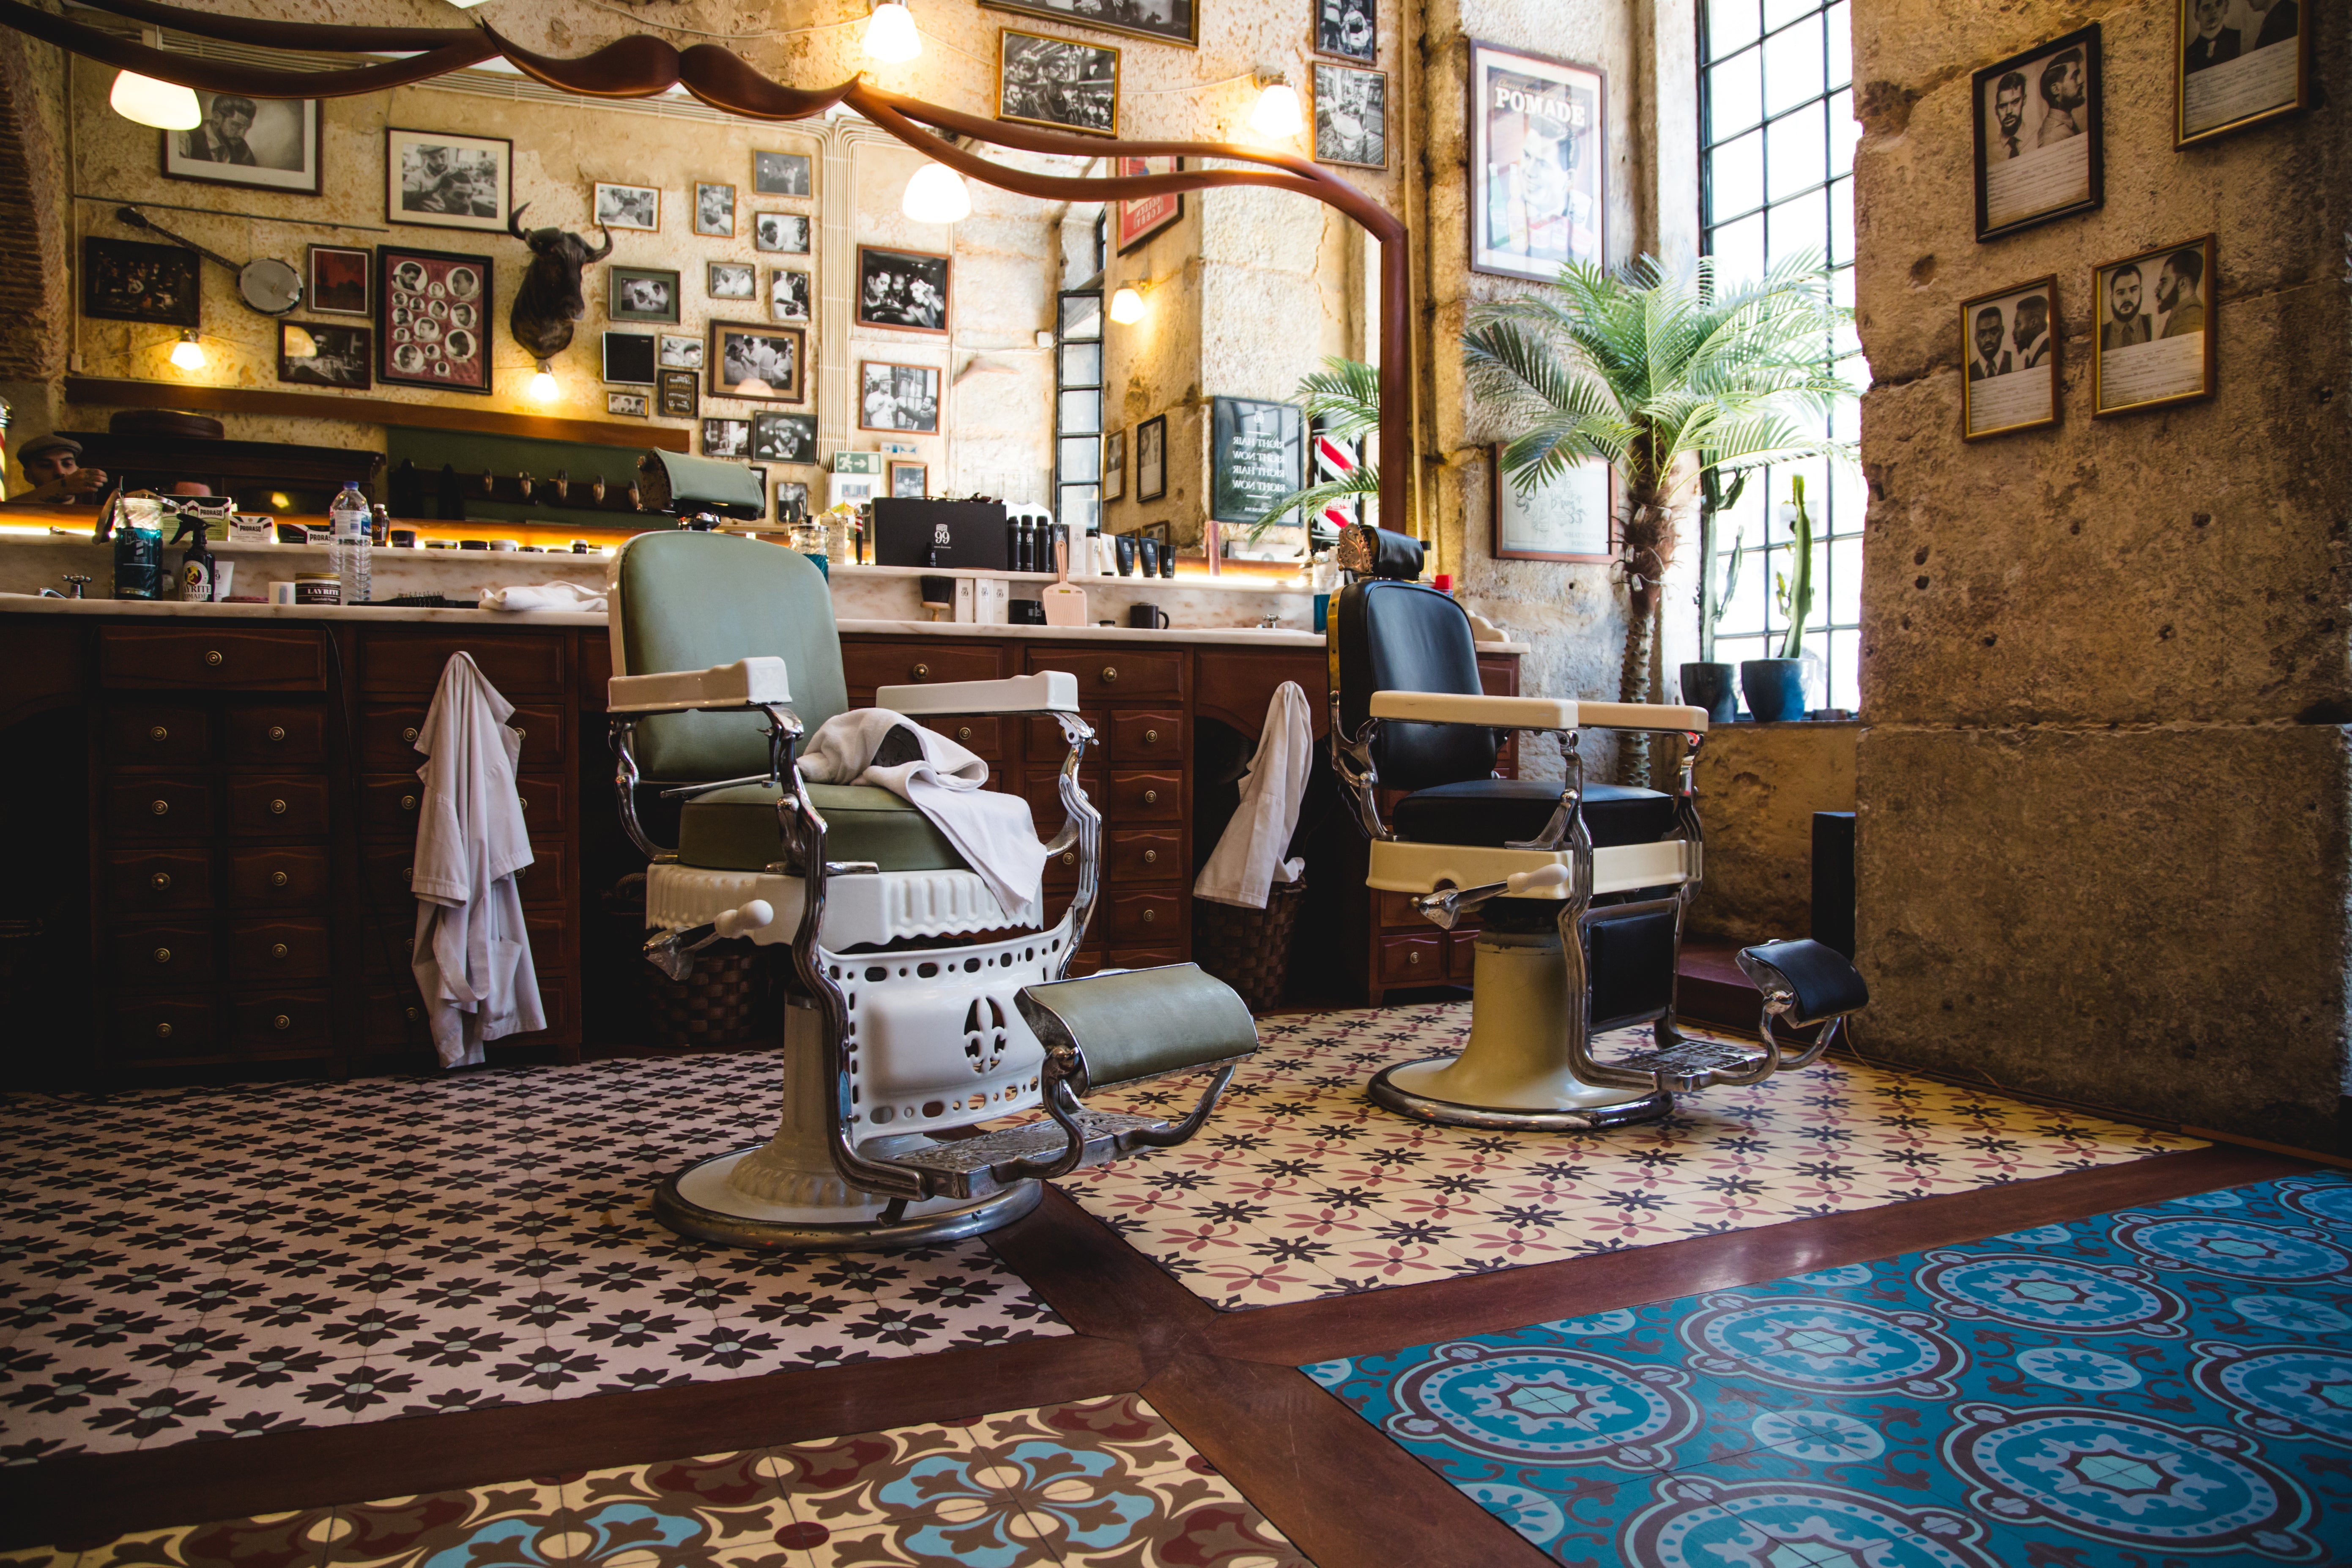 Browse Free HD Images of Quaint Barbershop With Eclectic Decor